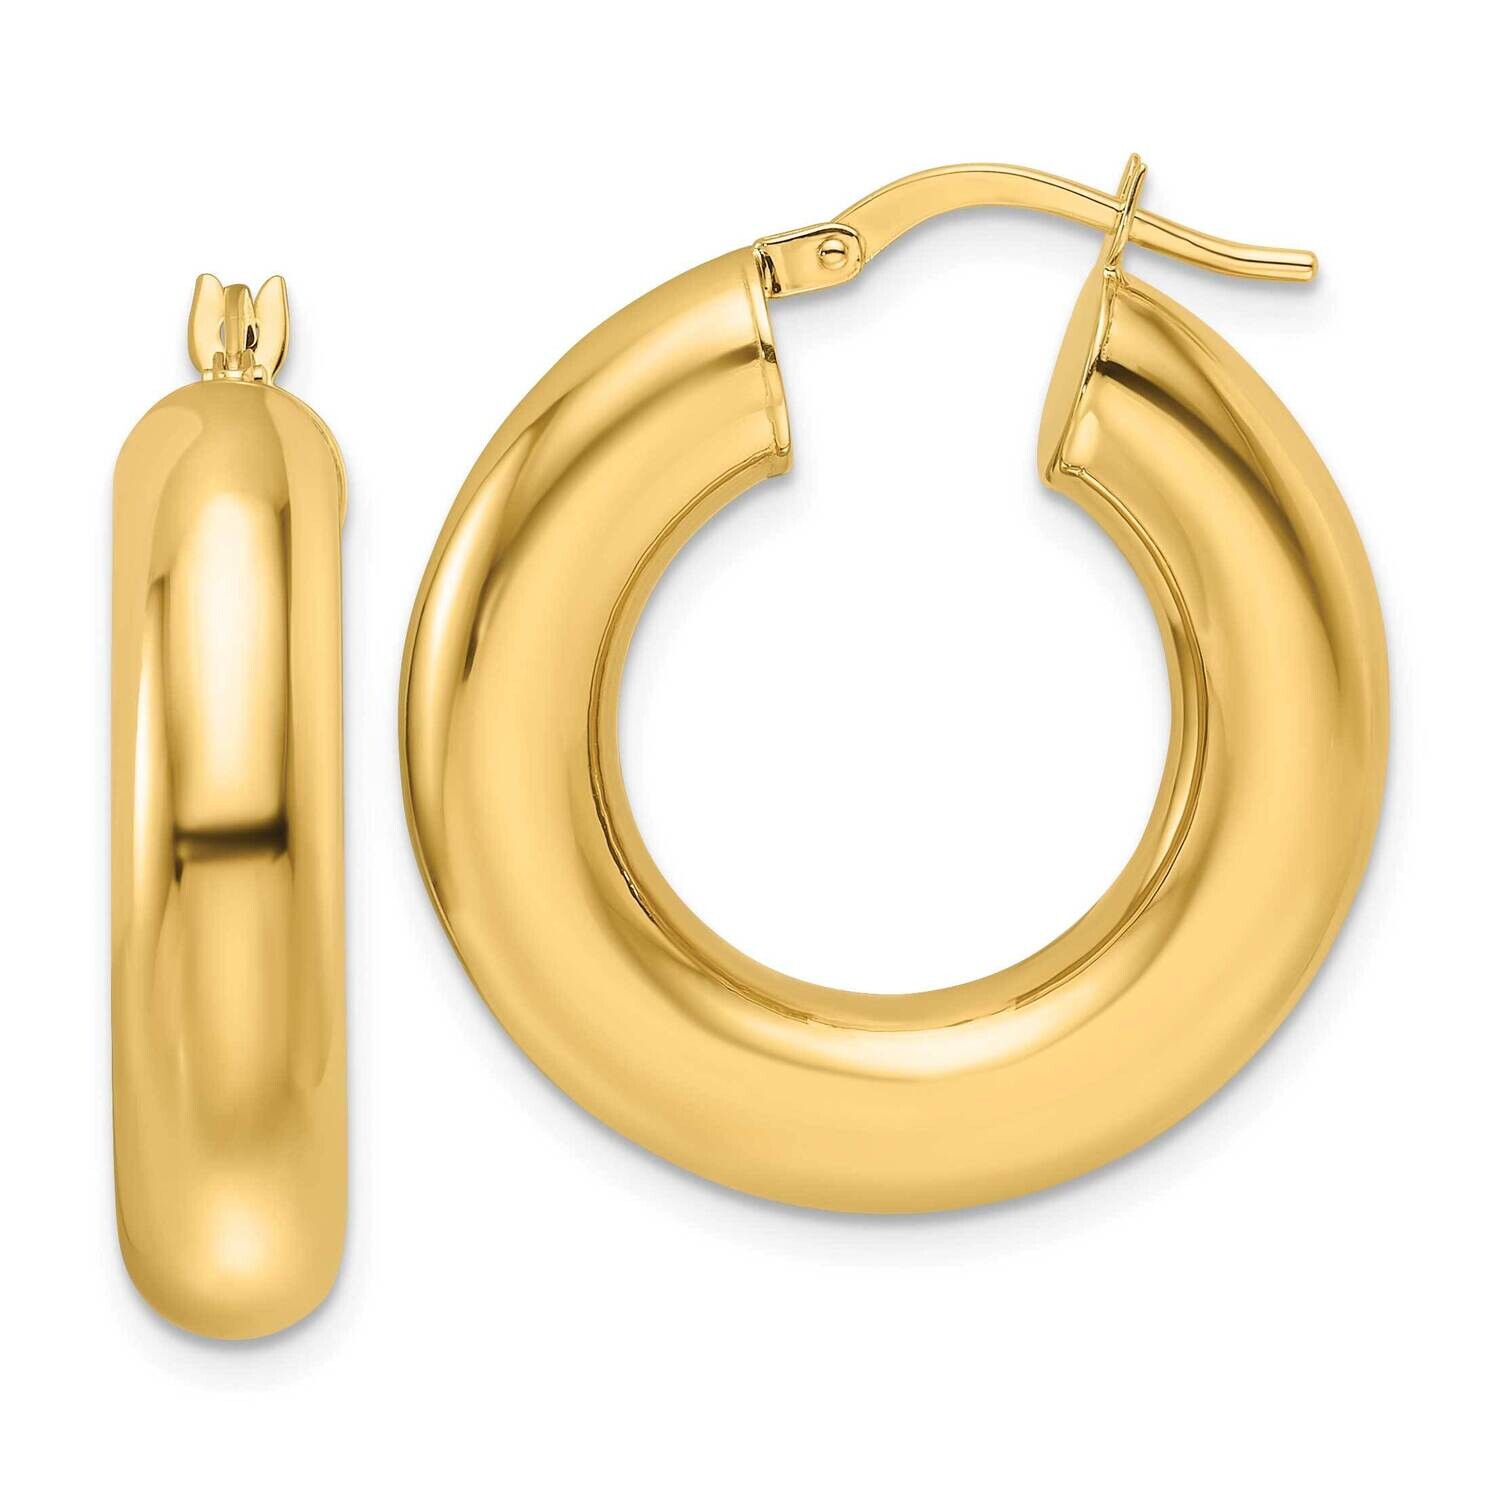 6mm Hollow Round Tube Round Hoop Earrings 14k Polished Gold T1165